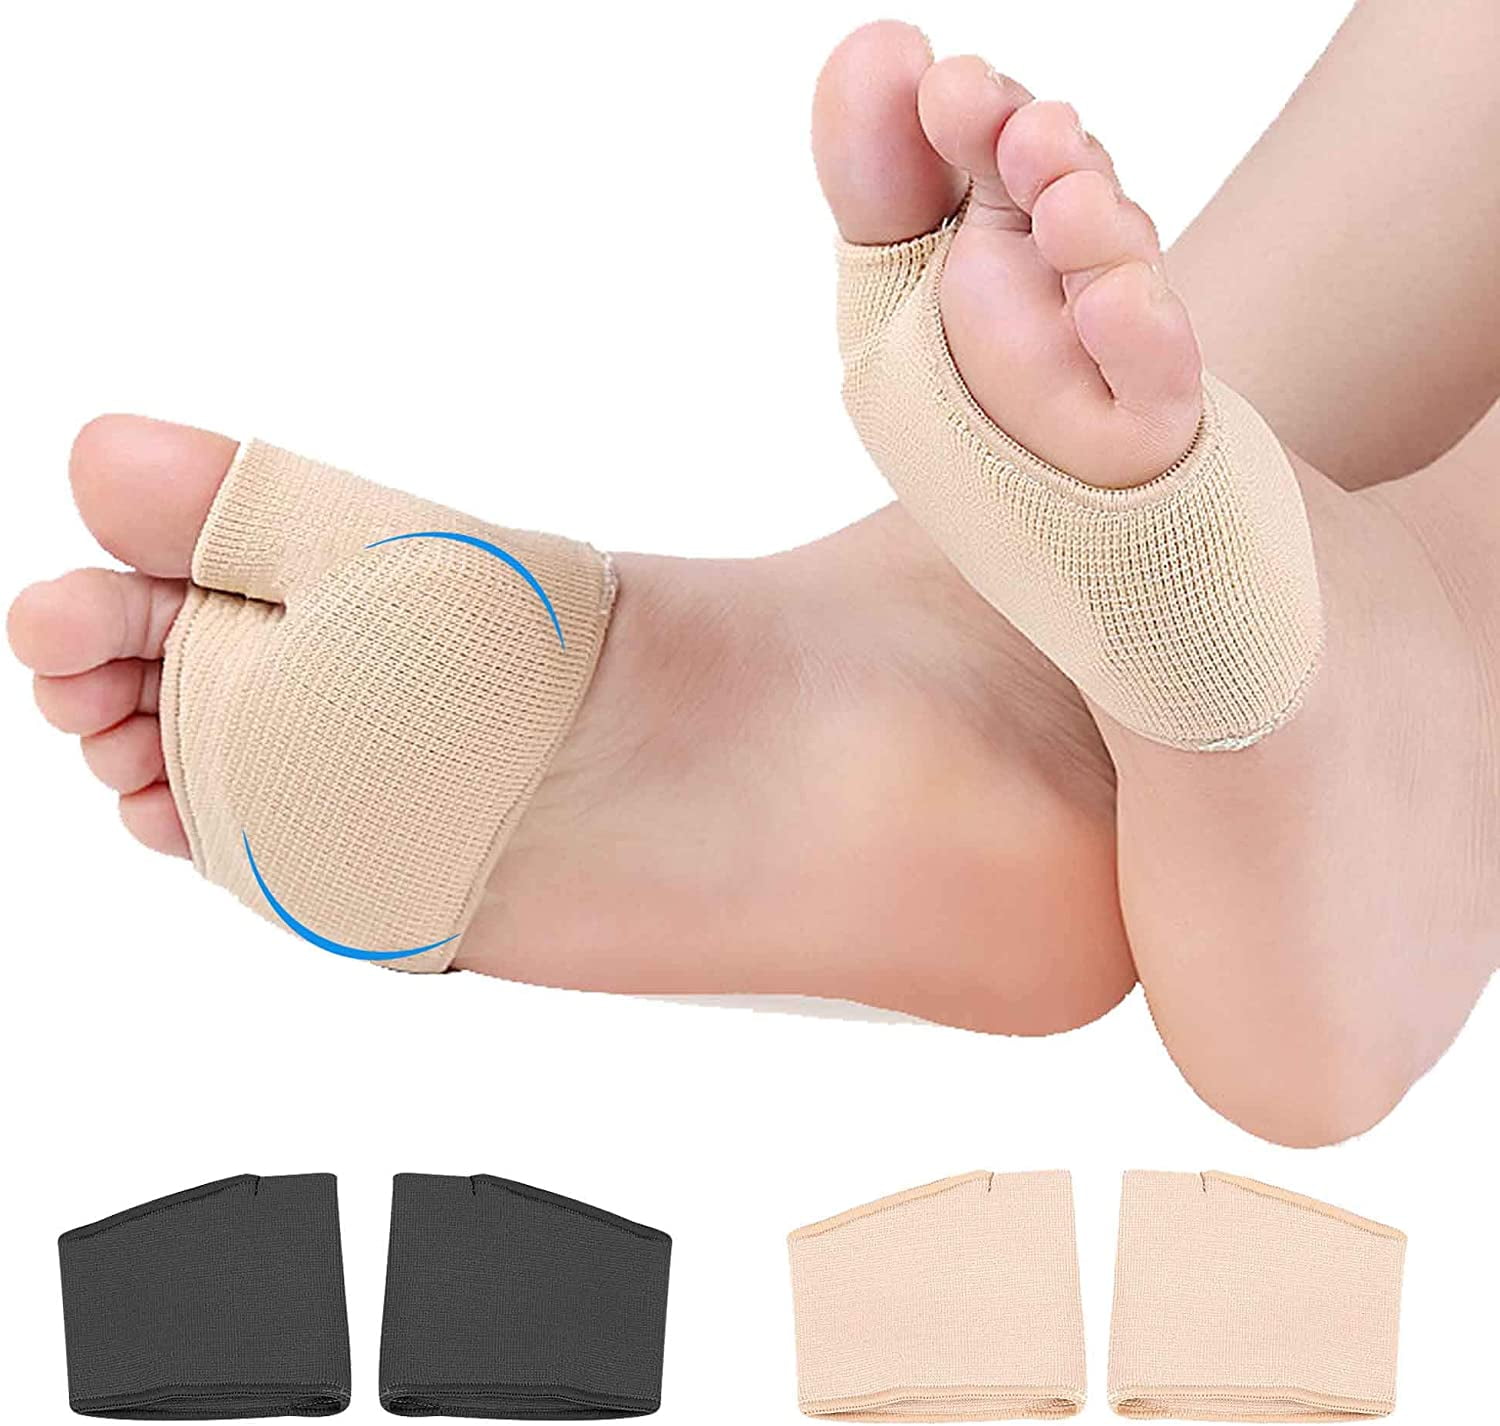 Details about   Metatarsal Pads for Women  Men The Go 1 Pair Ball of Foot Cushions Shoe Inserts